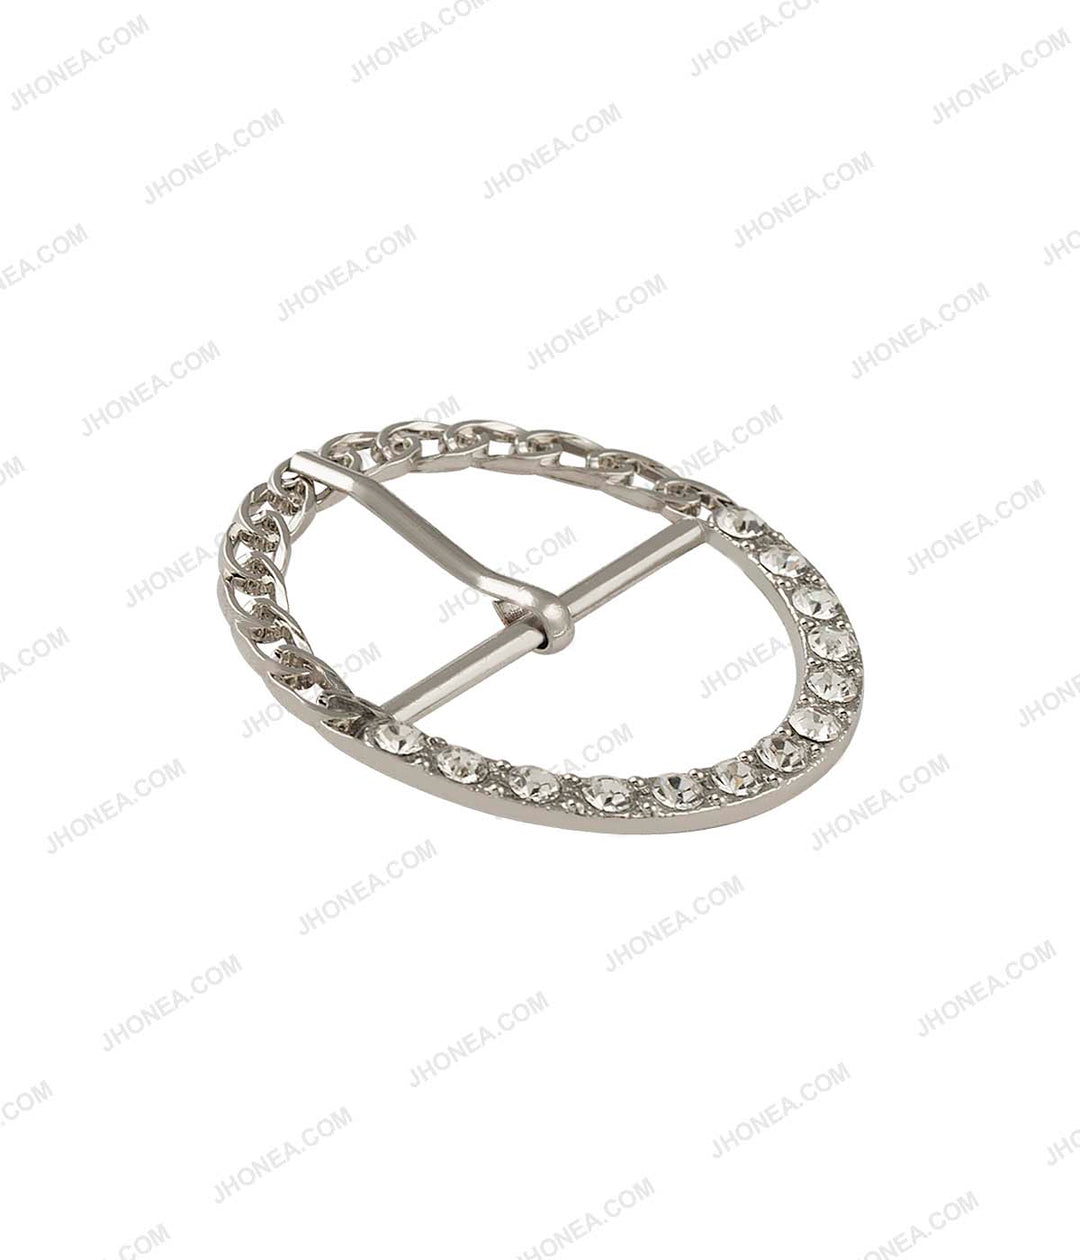 Sparkling Diamond Chain Design Structure Prong Belt Buckle for Ladies